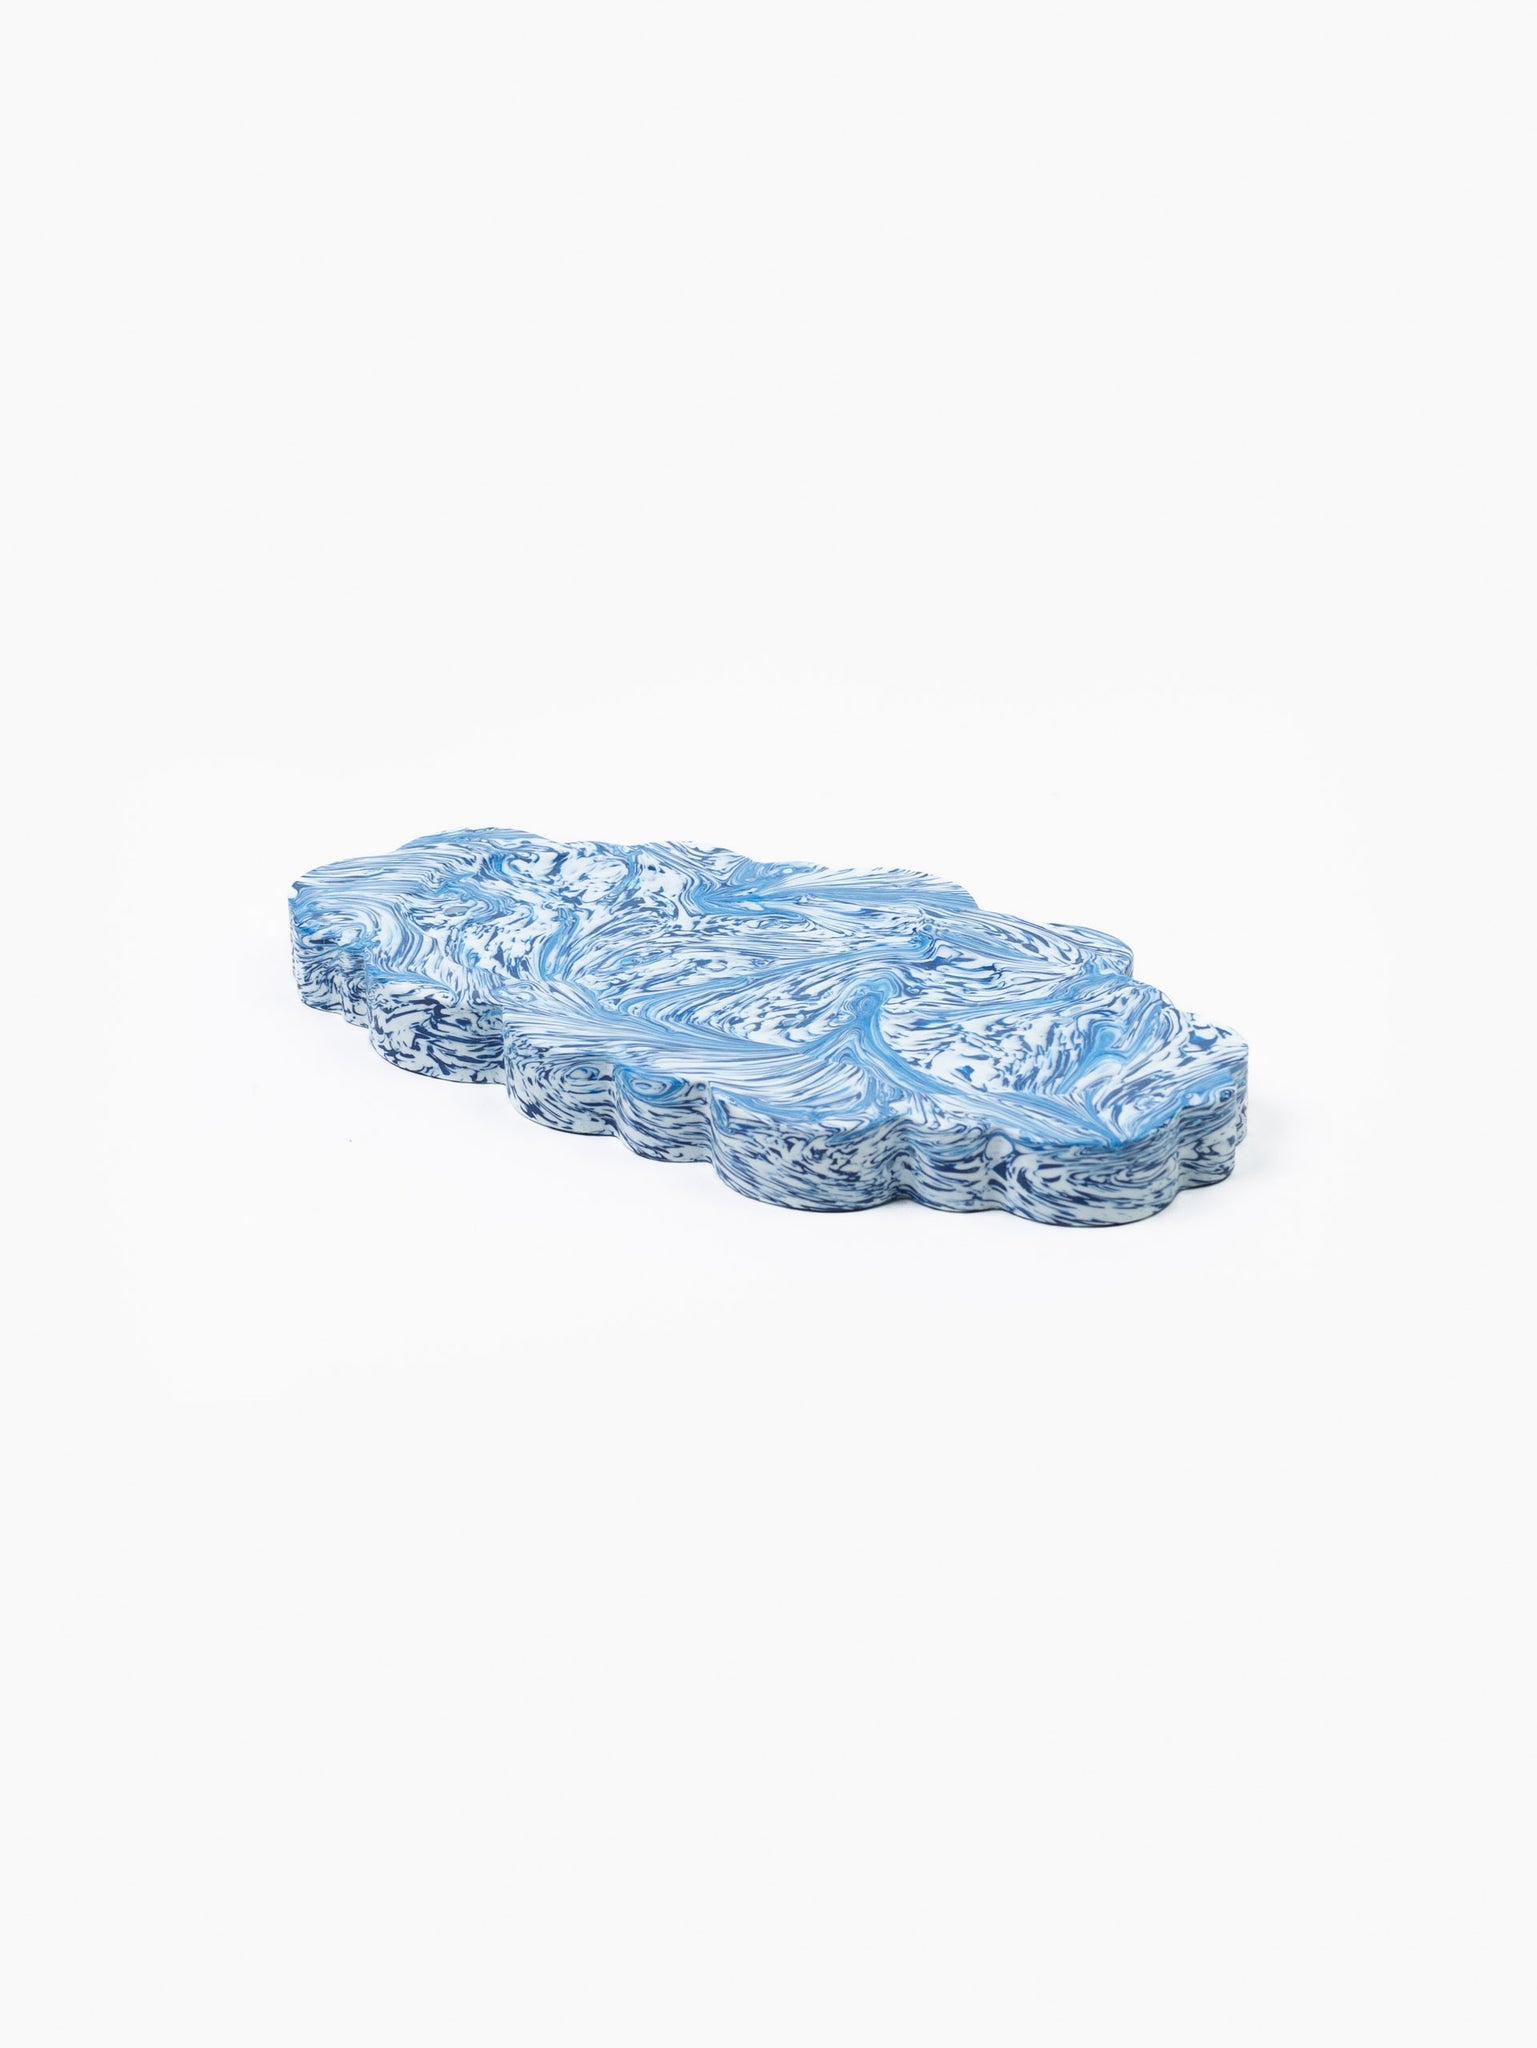 Clouded Desk Tray Blue